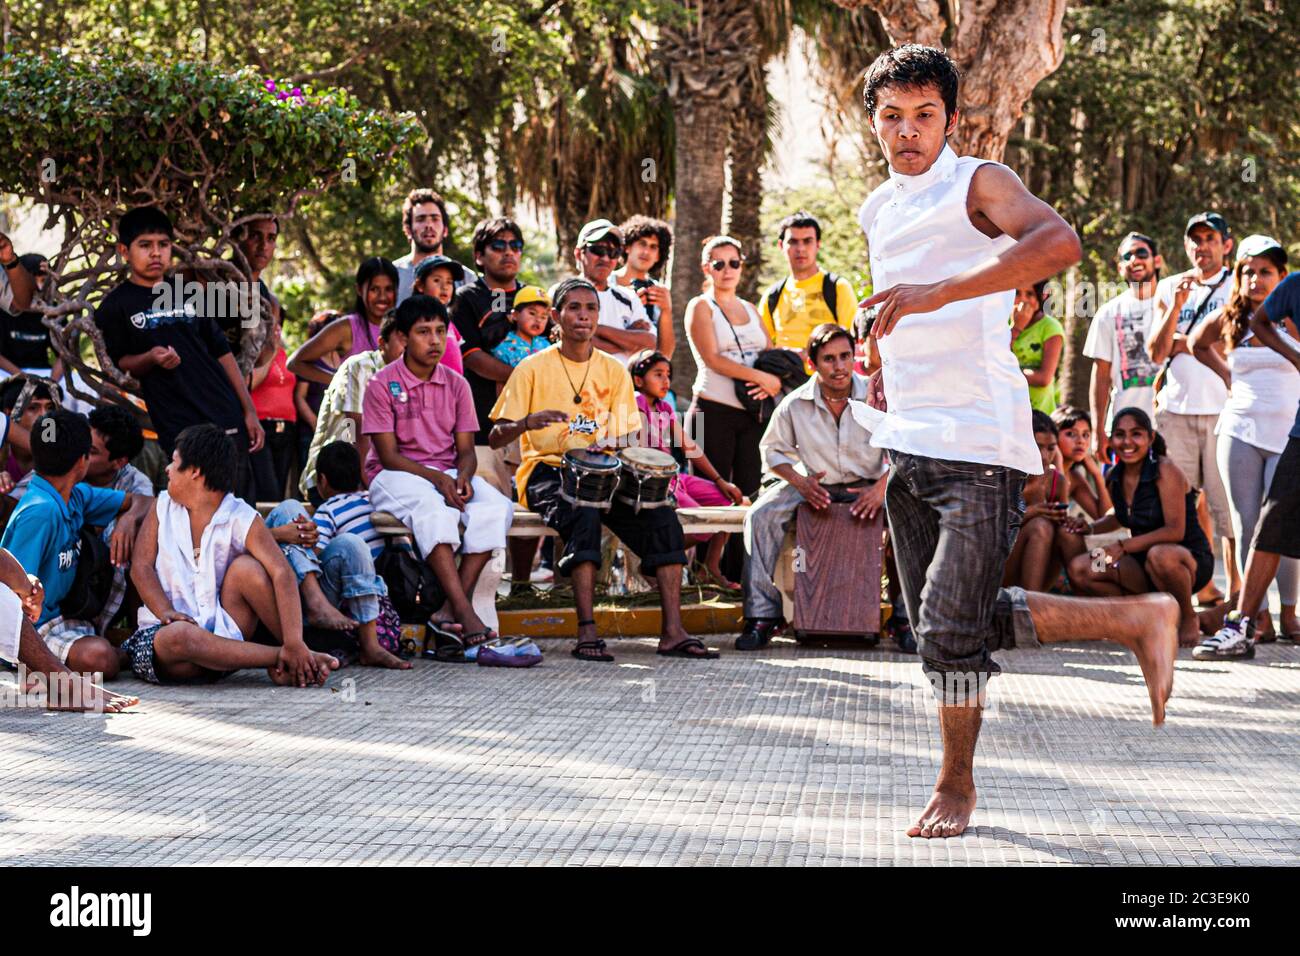 Young men dancing on the sidewalk in Huacachina. Ica, Department of Ica, Peru. Stock Photo